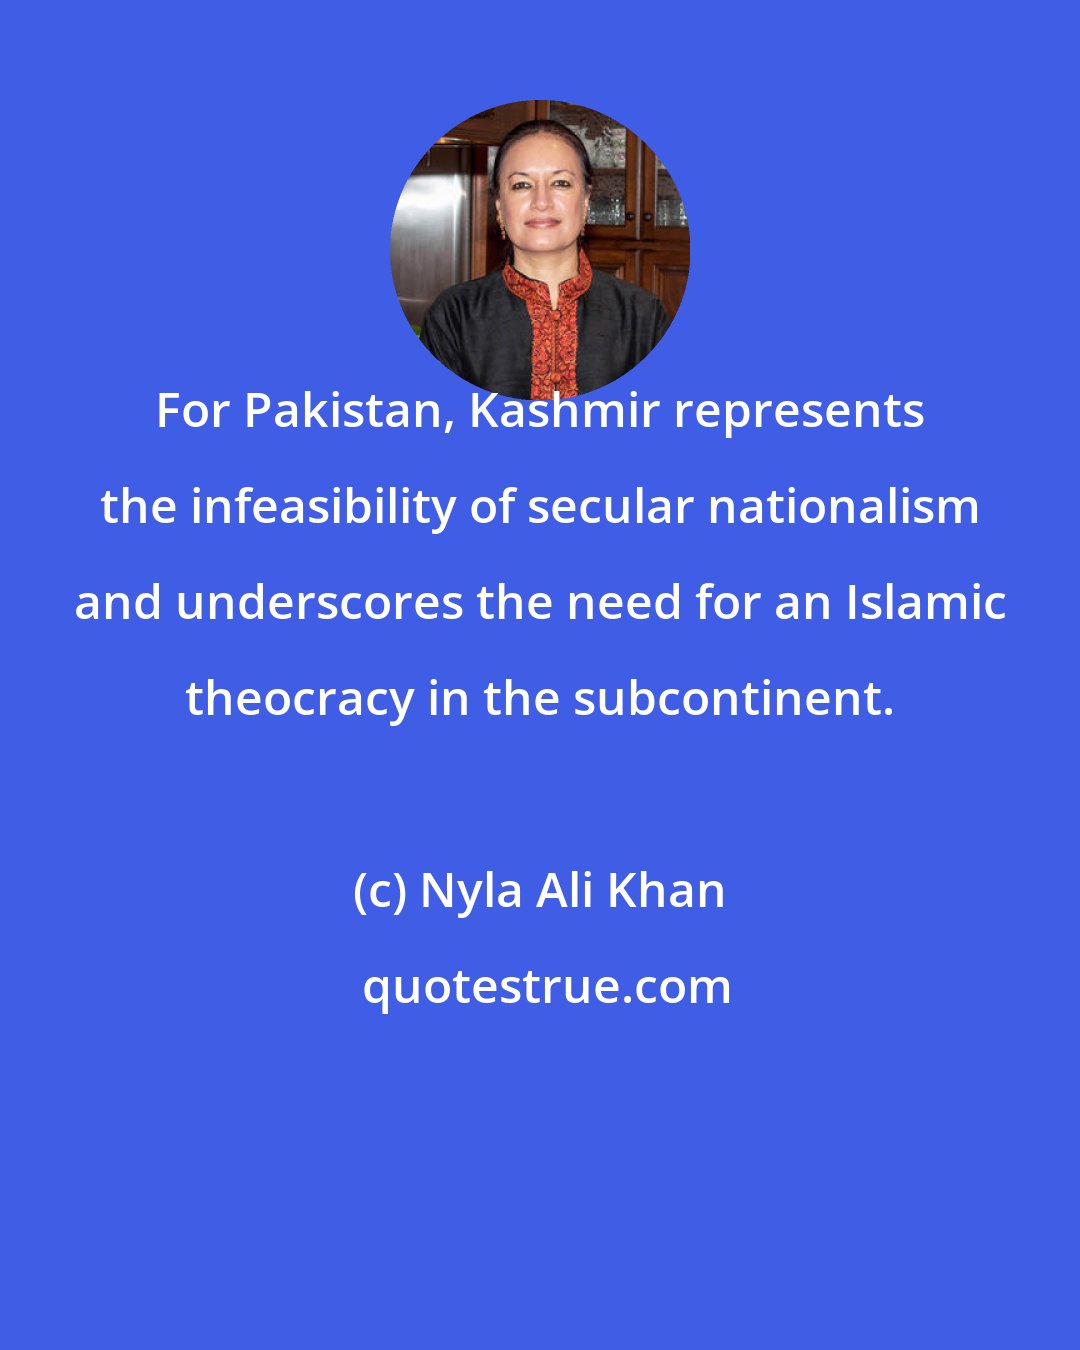 Nyla Ali Khan: For Pakistan, Kashmir represents the infeasibility of secular nationalism and underscores the need for an Islamic theocracy in the subcontinent.